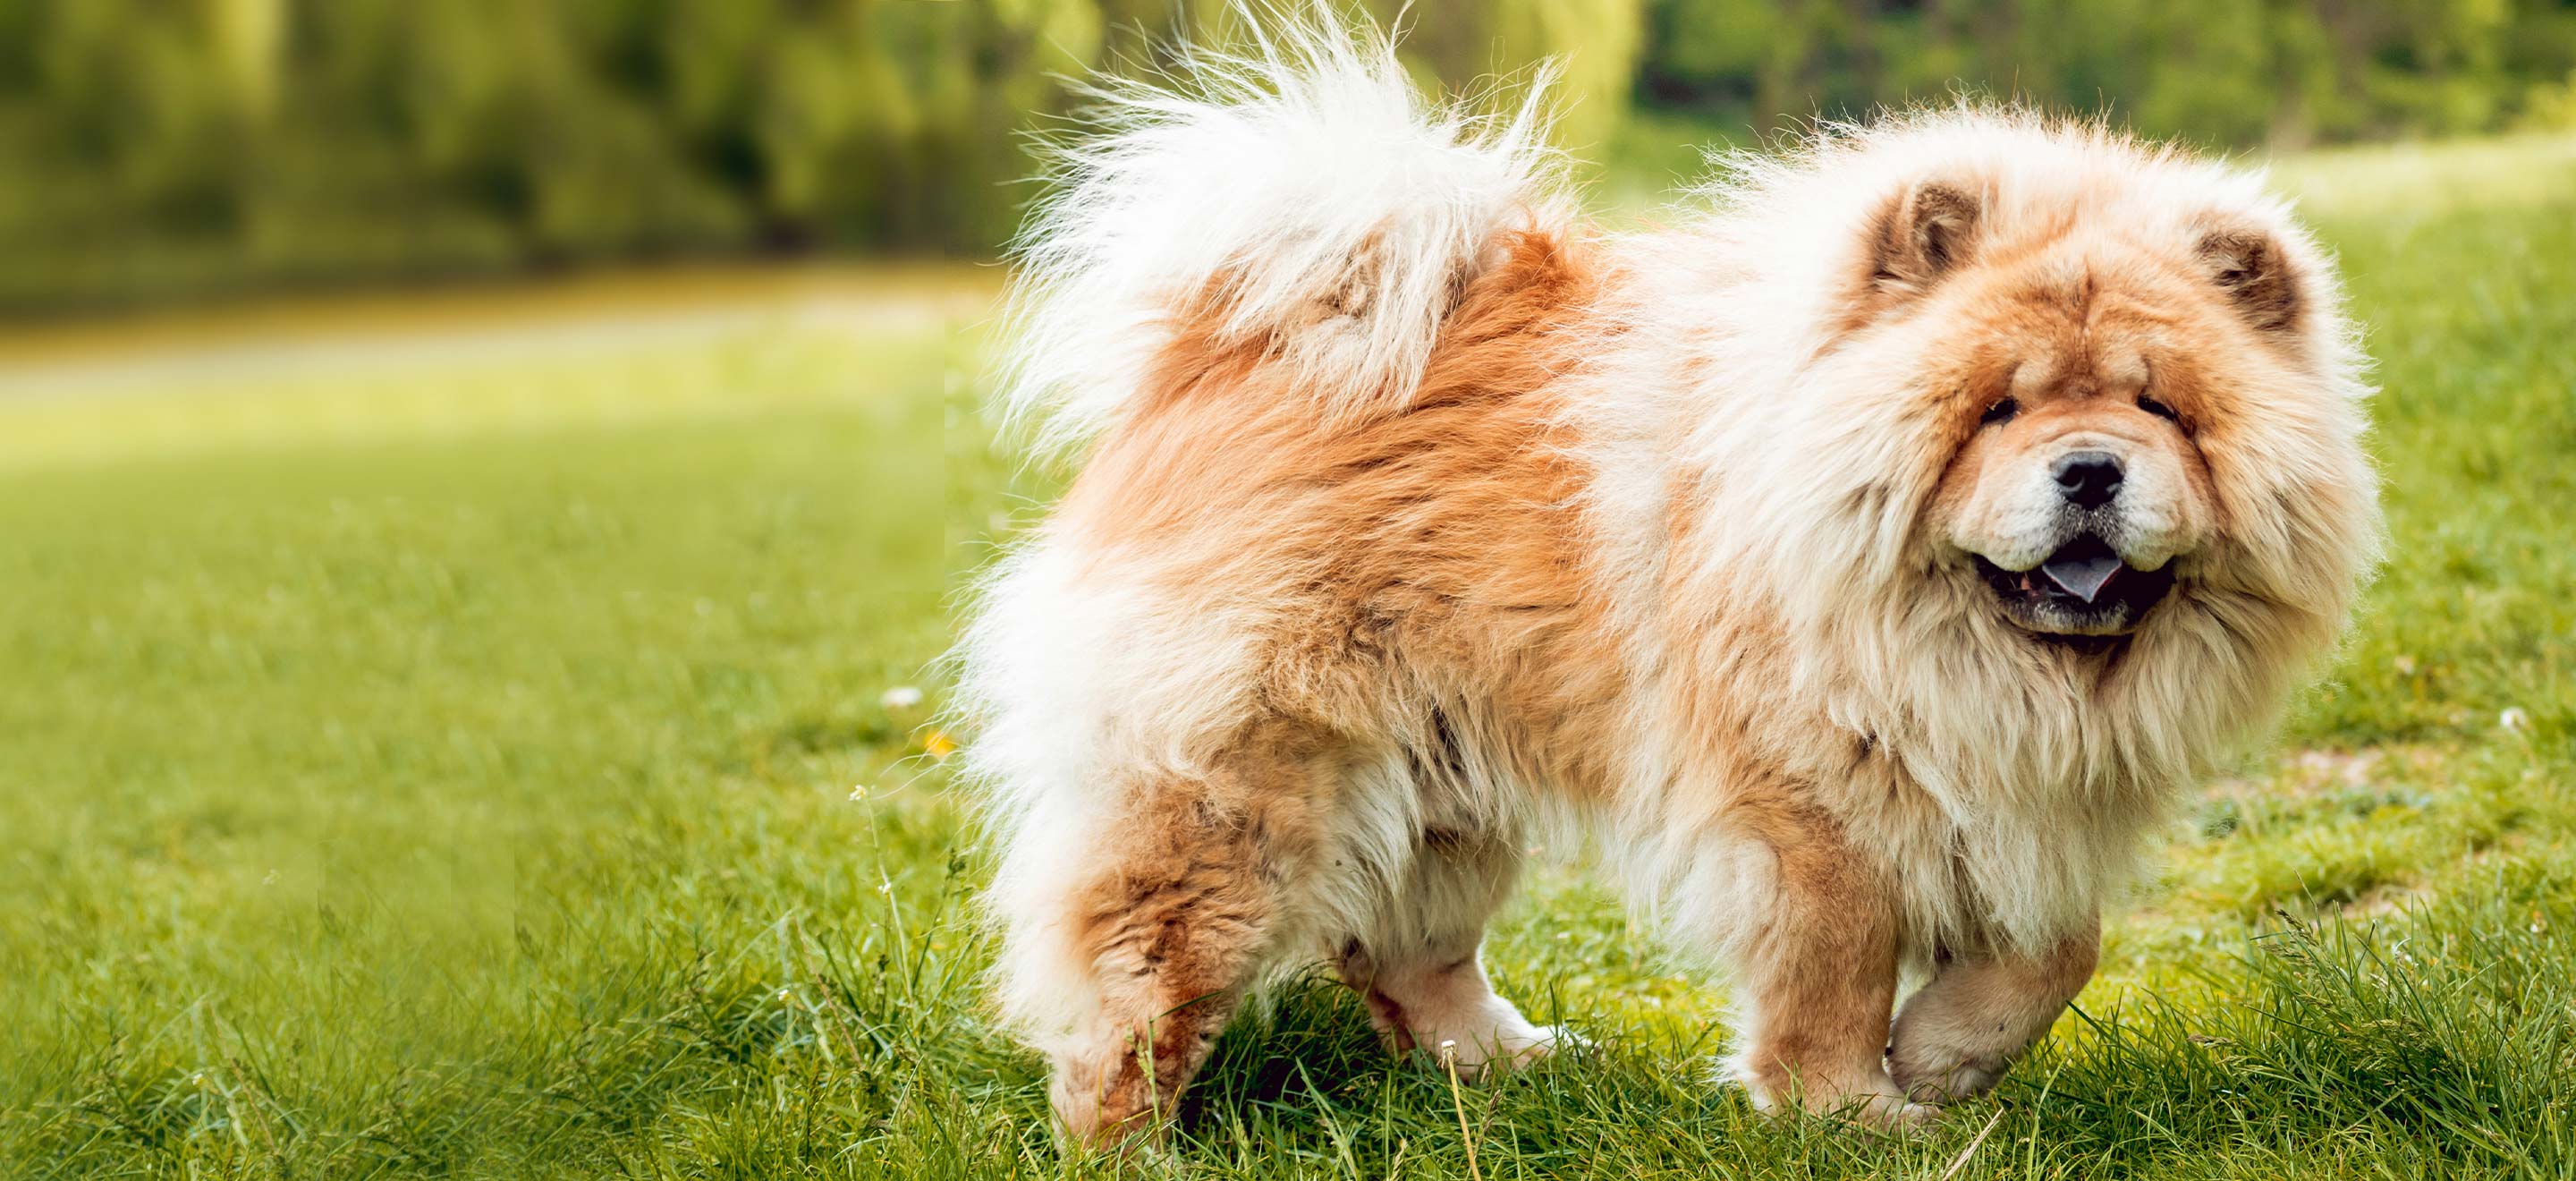 Fluffy tan Chow Chow walking on grass image